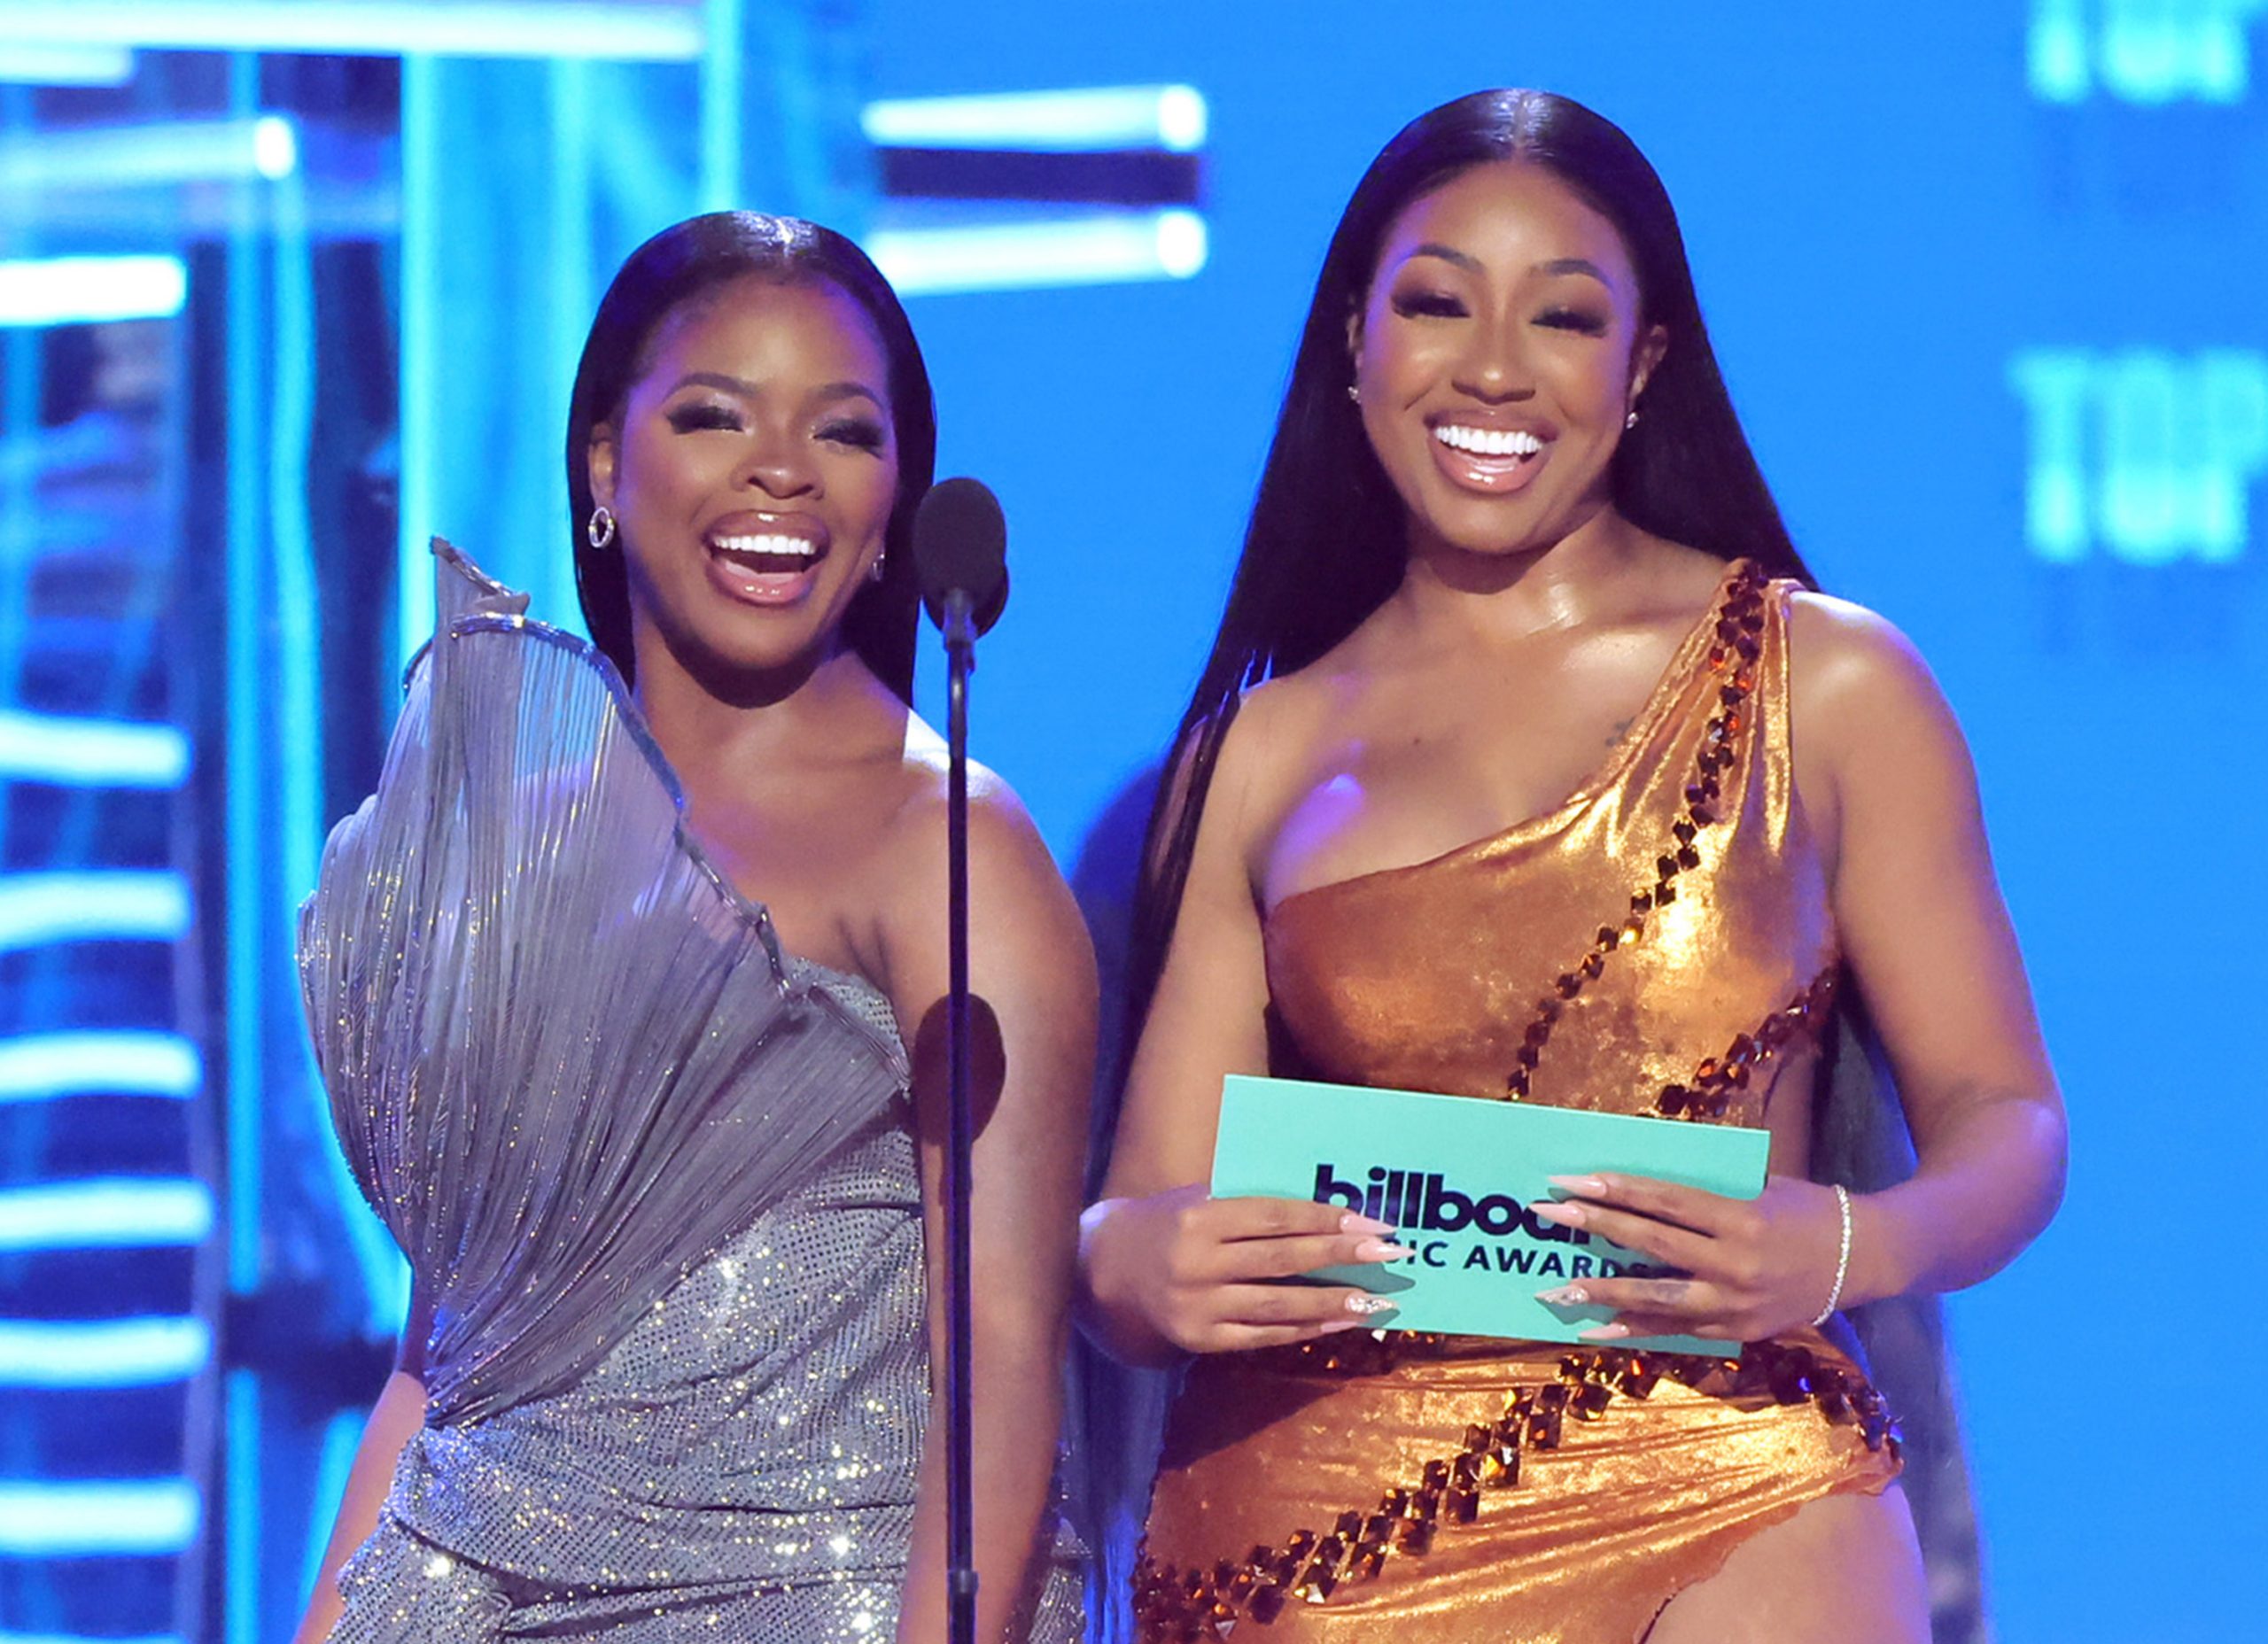 City Girls' JT and Yung Miami talk onstage at the 2022 Billboard Music Awards